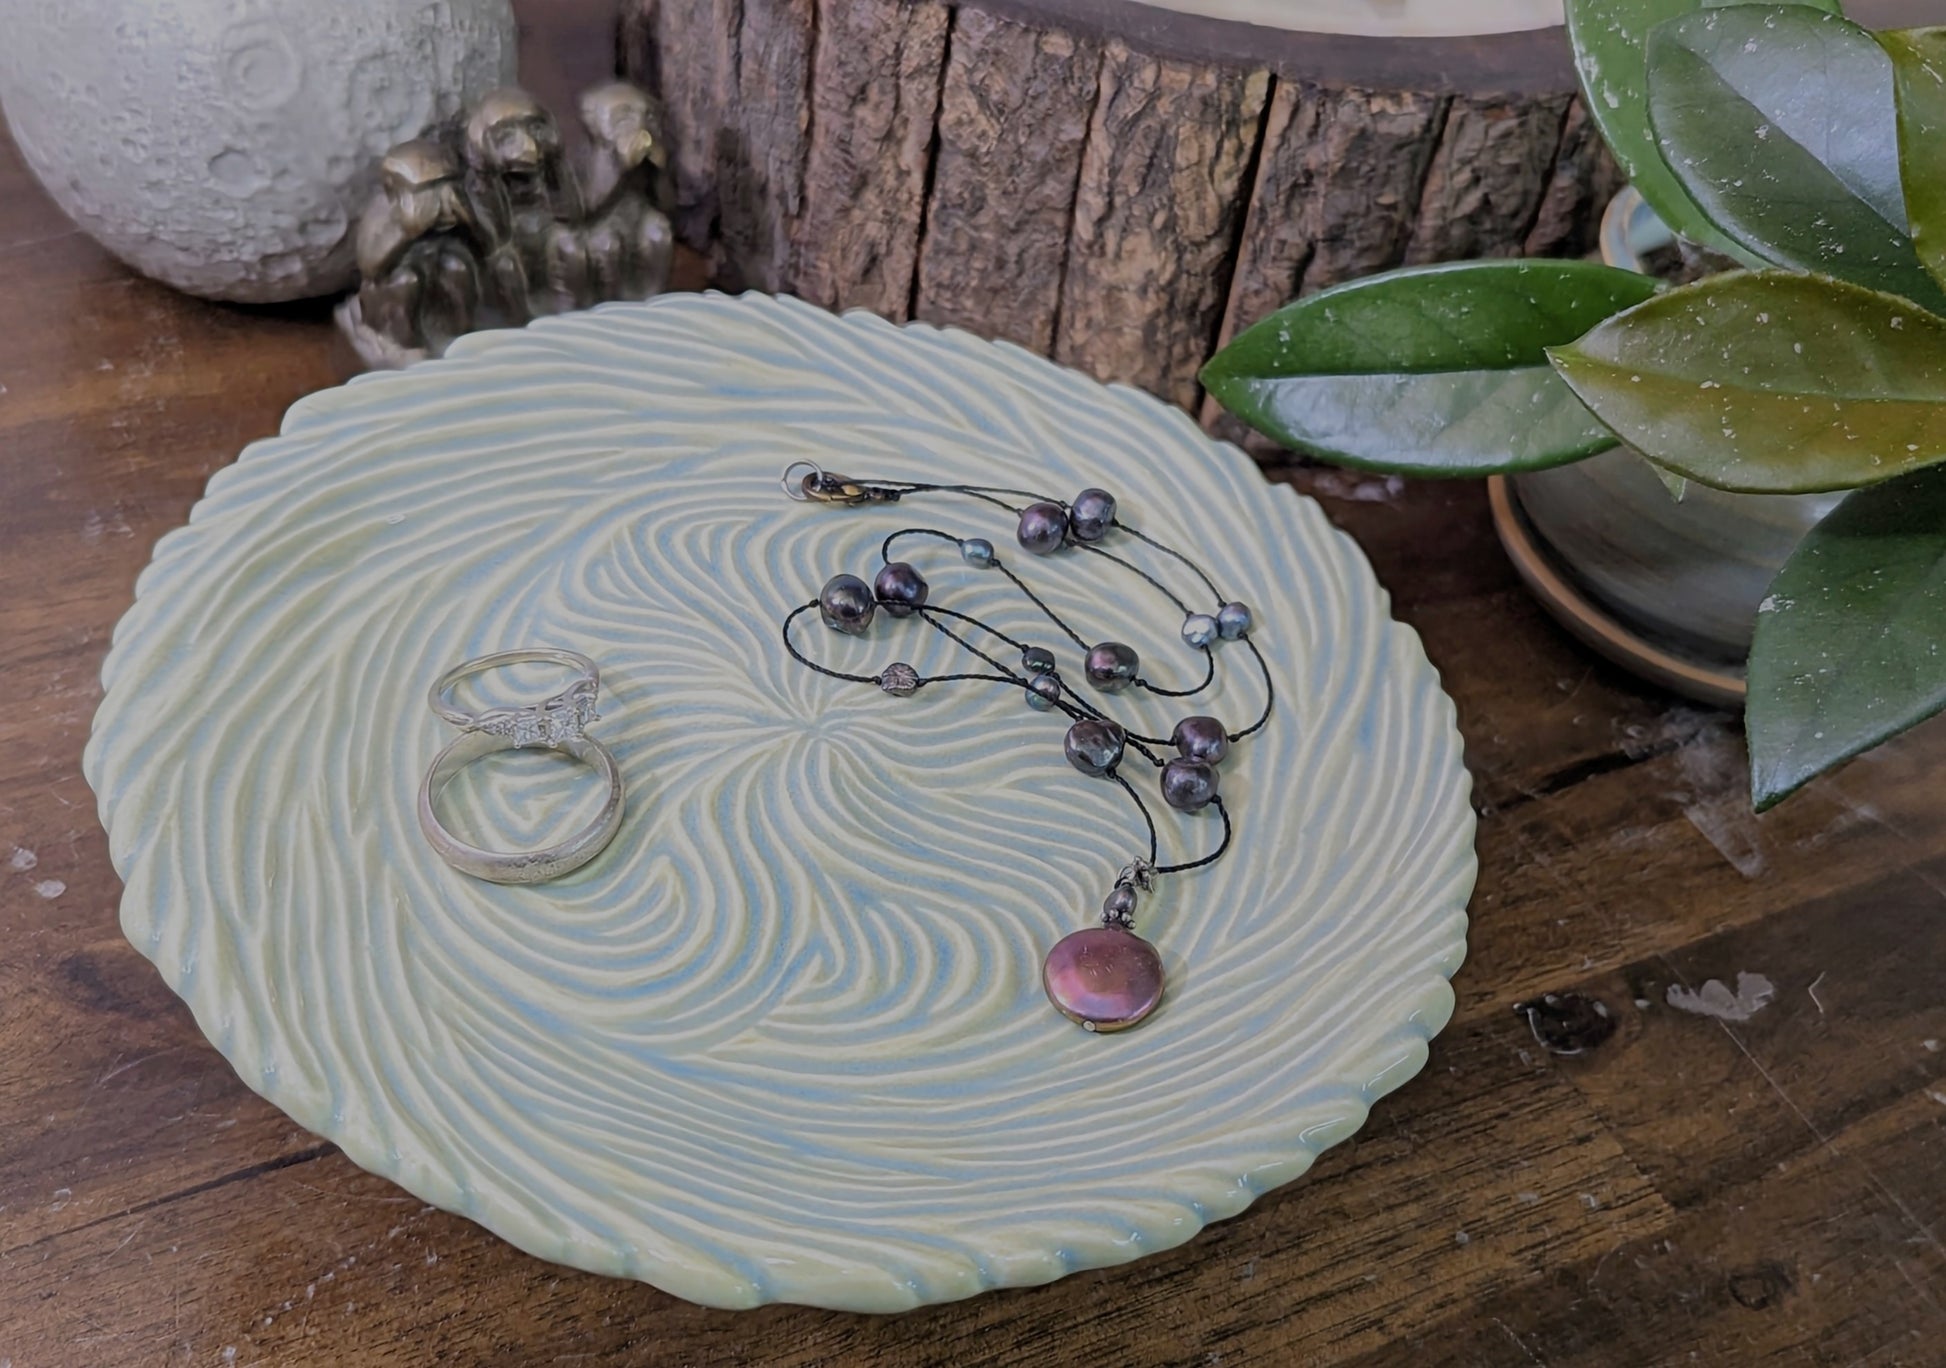 A Portal plate in Celadon Swirls holding 2 rings and a necklace